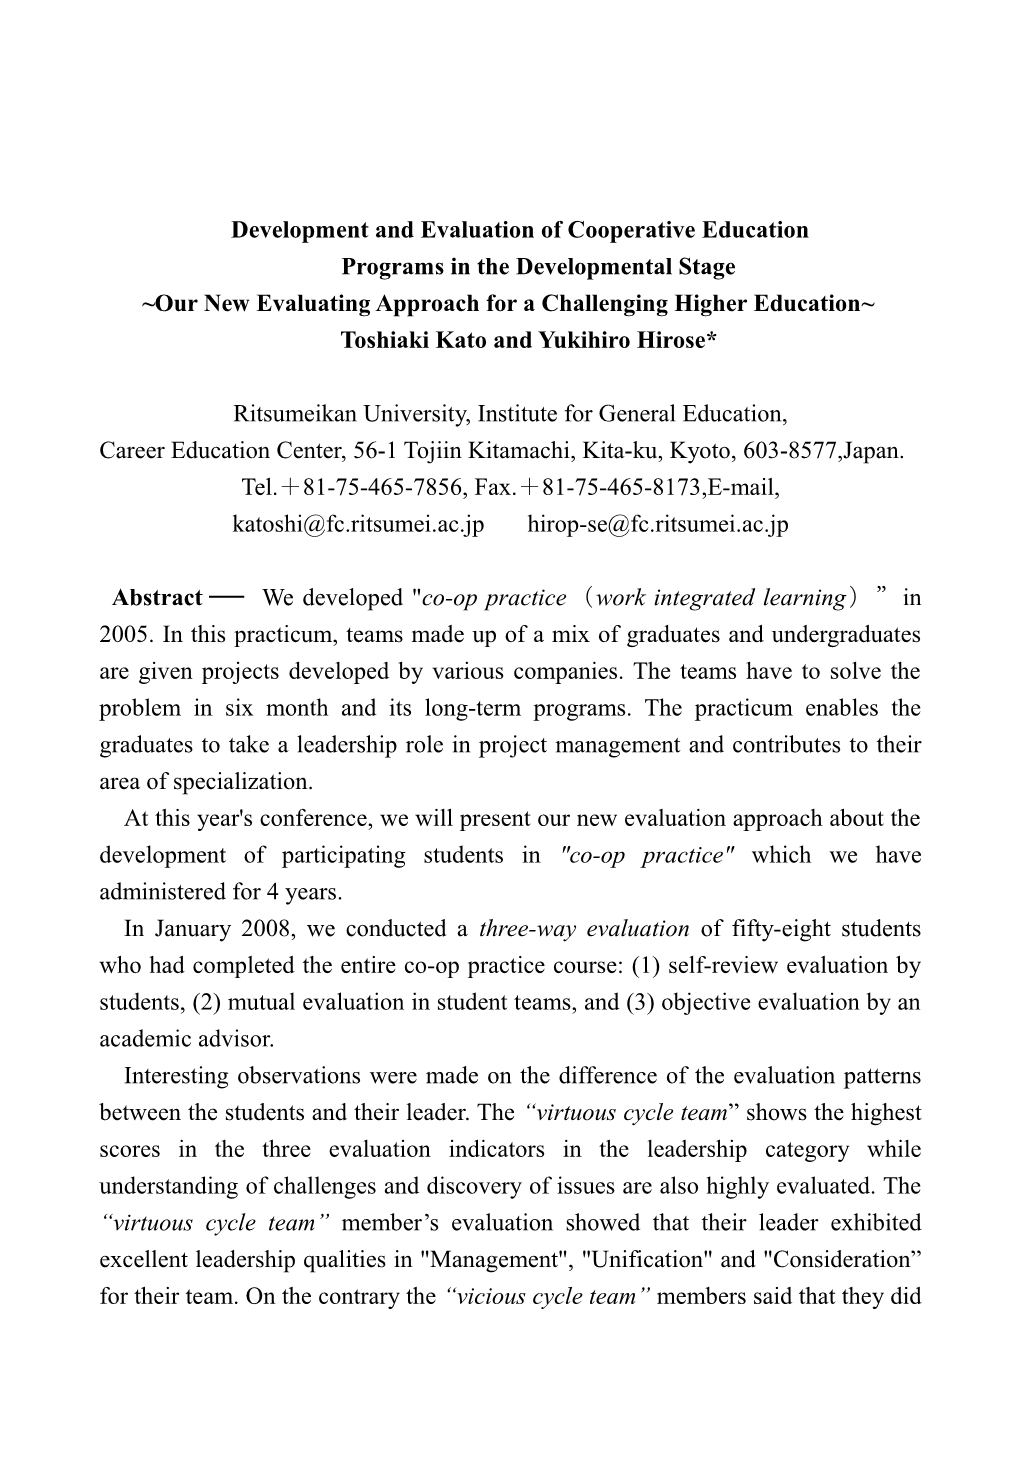 Development and Evaluation of Cooperative Education Programs